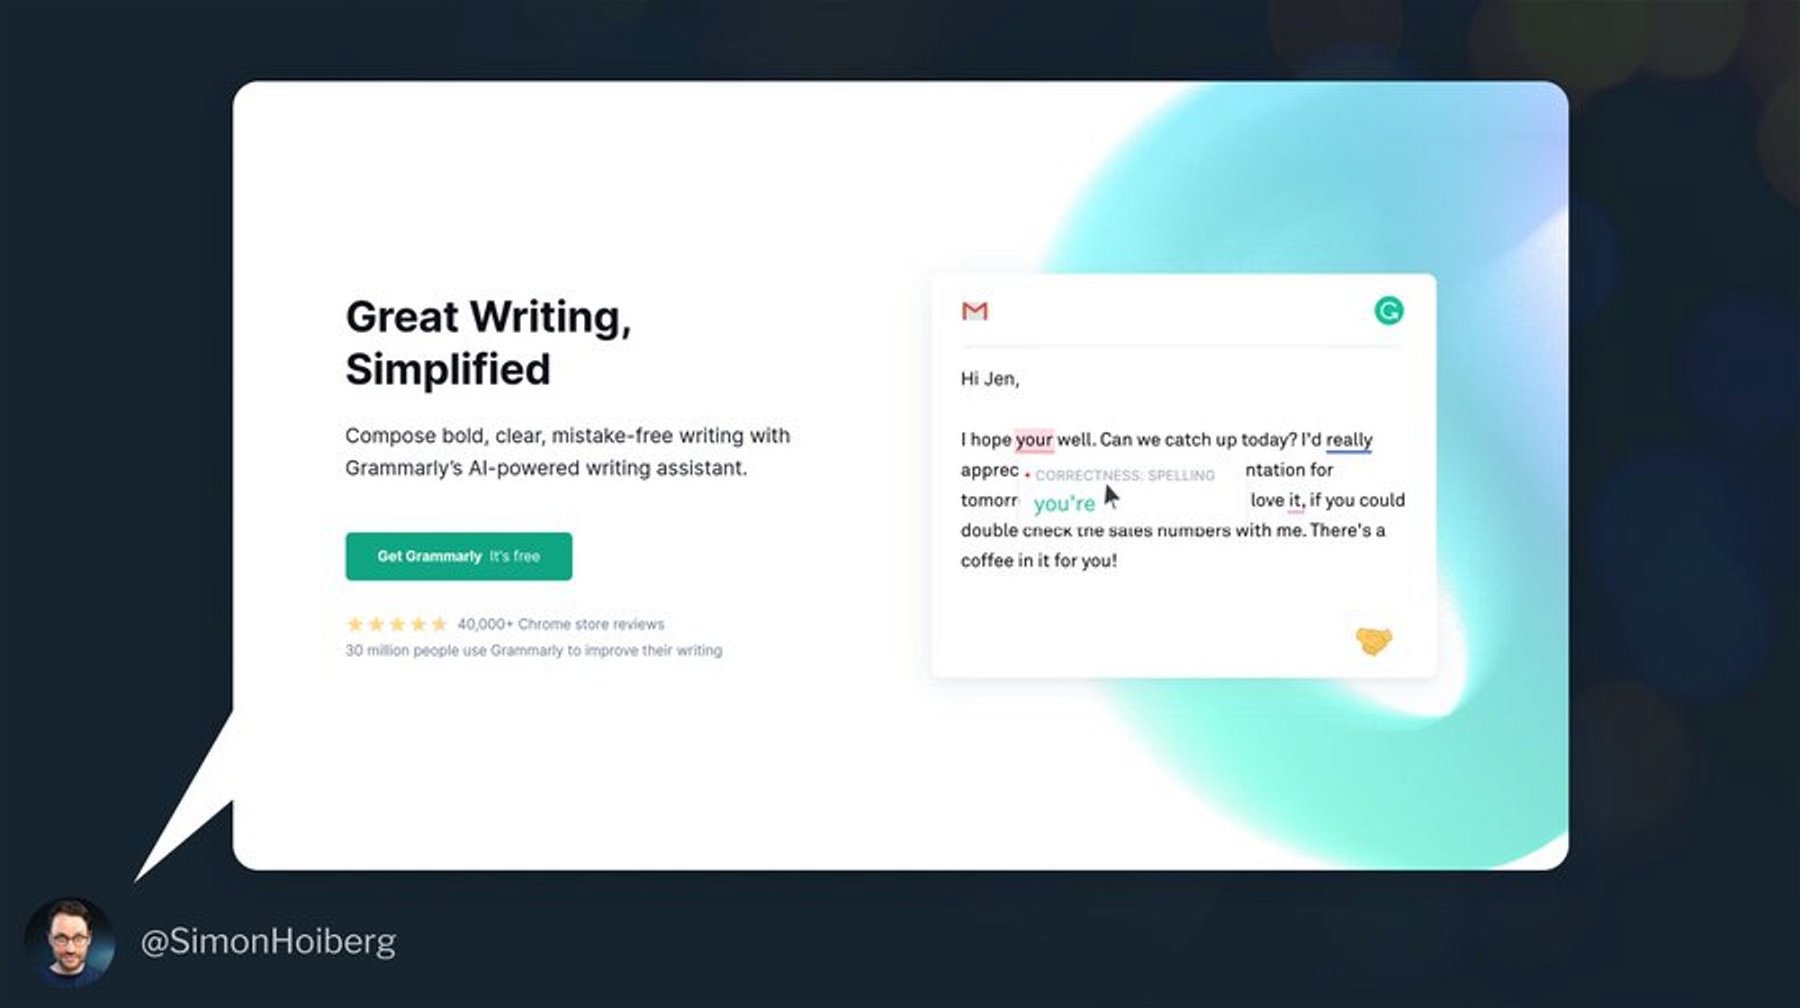 Simon Hoiberg shows how Grammarly gives suggestions for better writing.